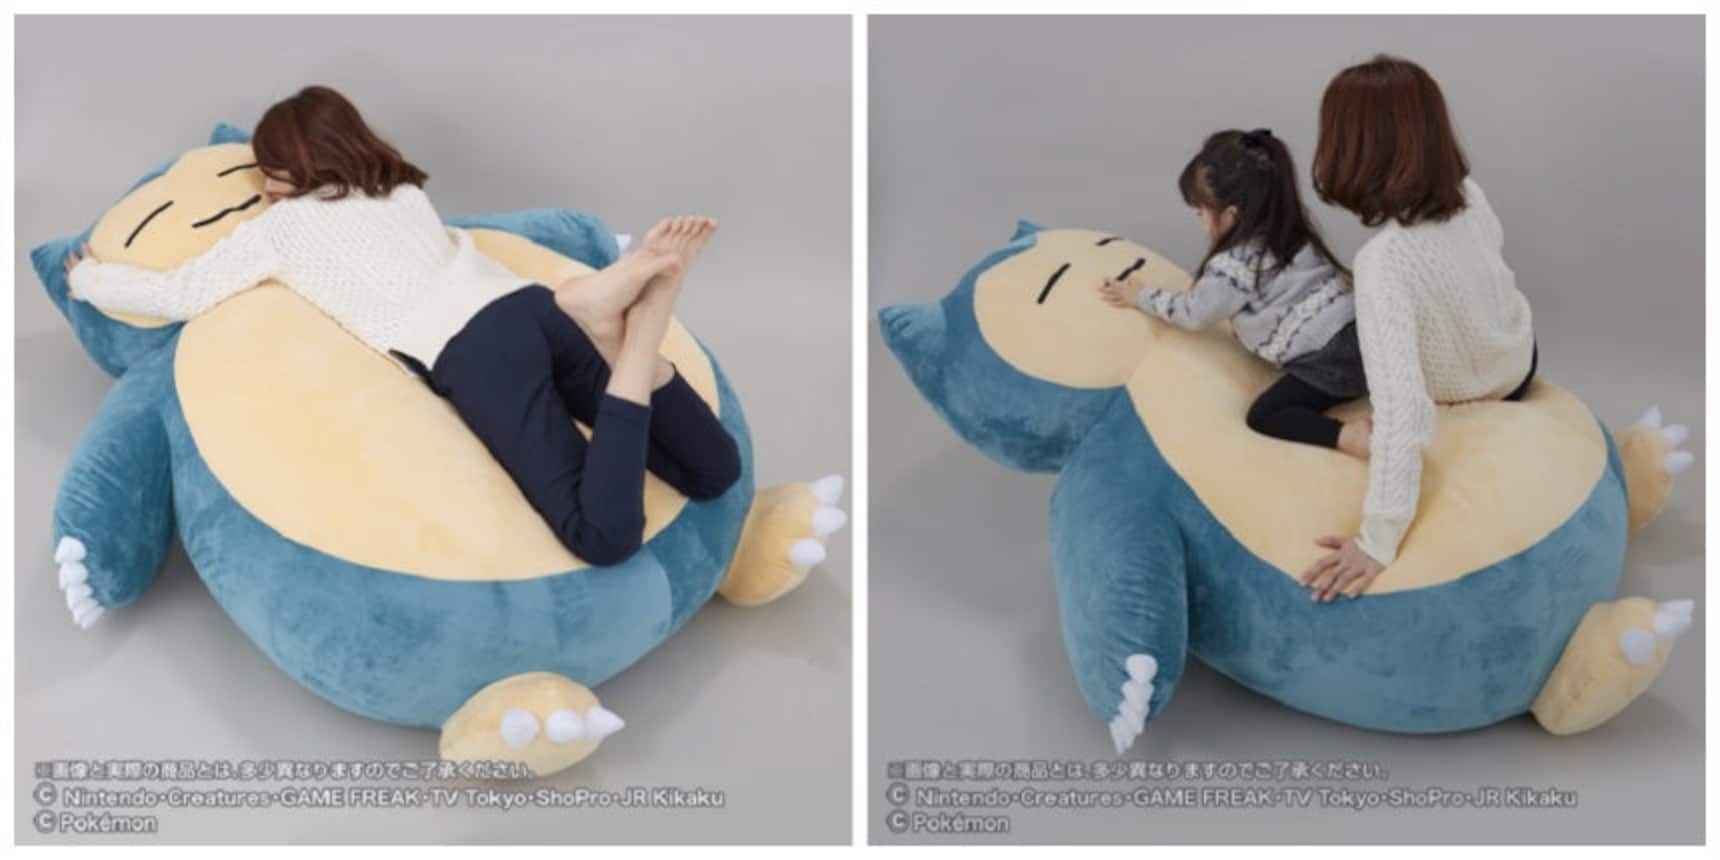 Catch Some Zs On Your Very Own Snorlax!